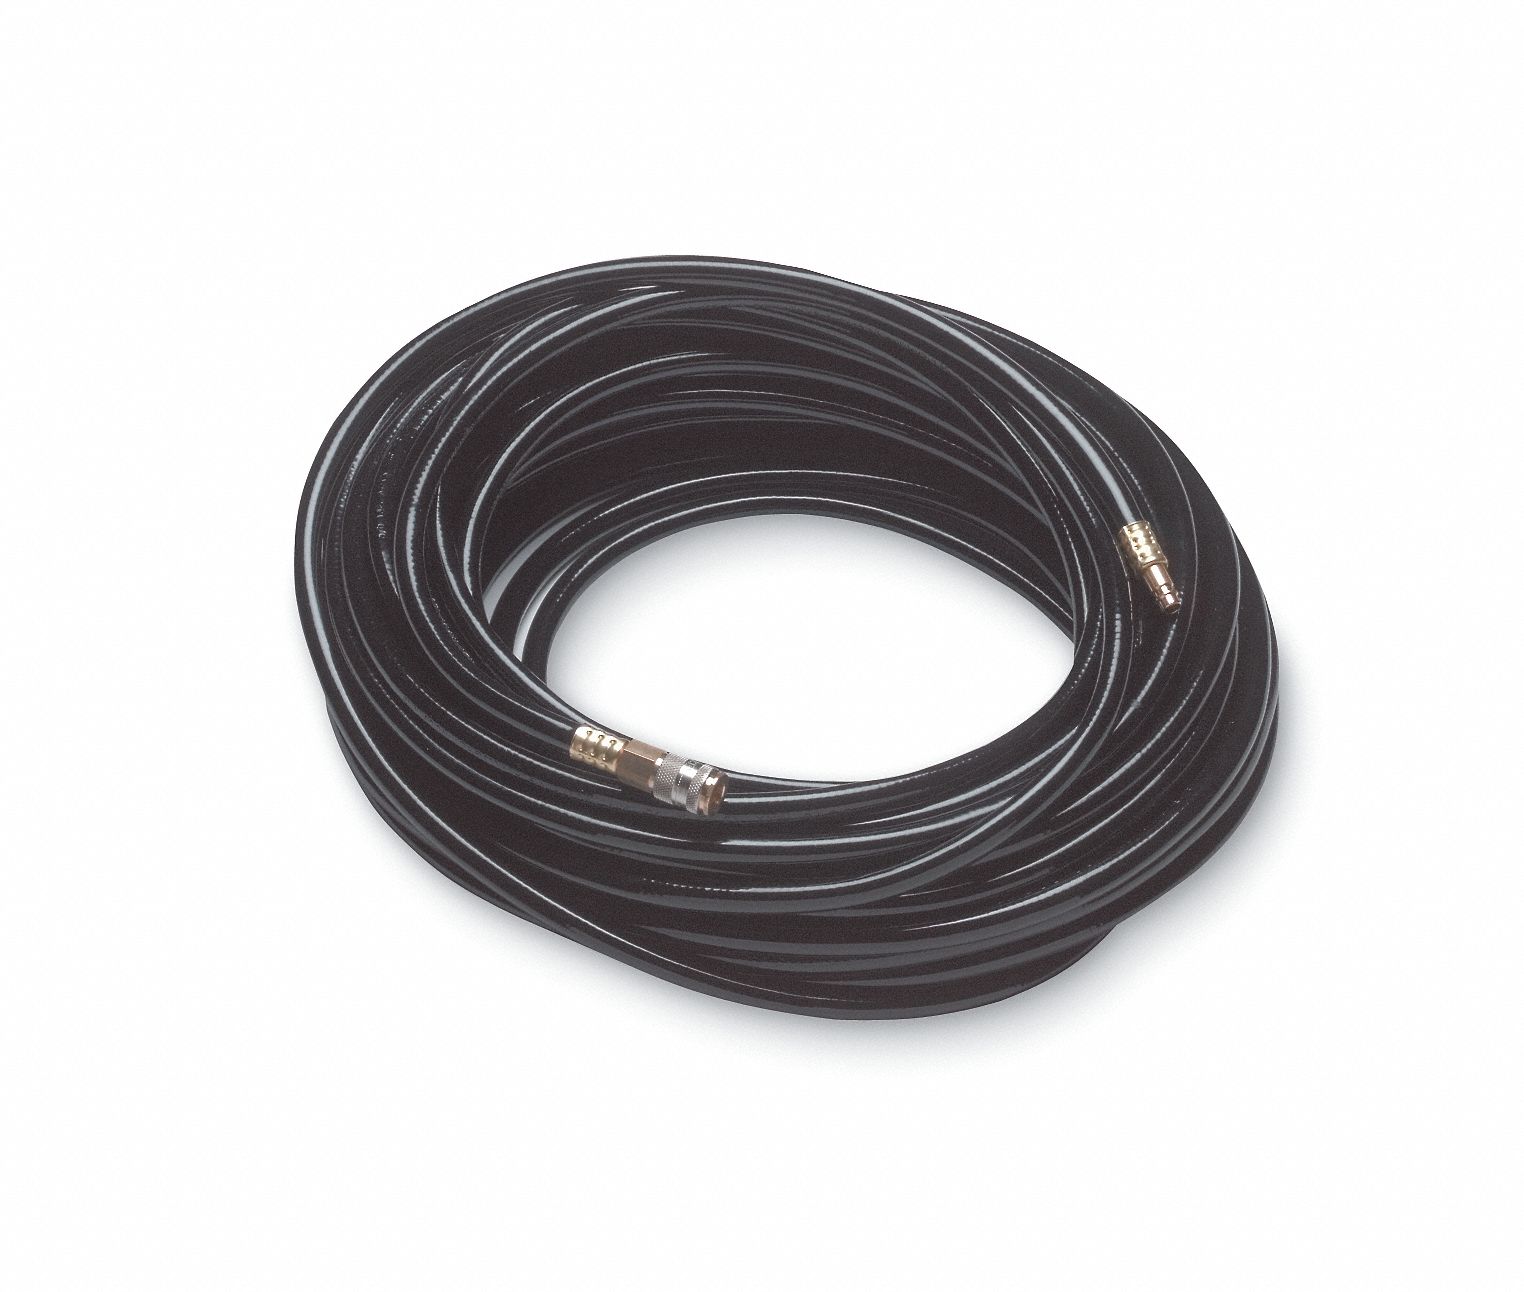 3WXD8 - Airline Hose 100 ft. 185 psi